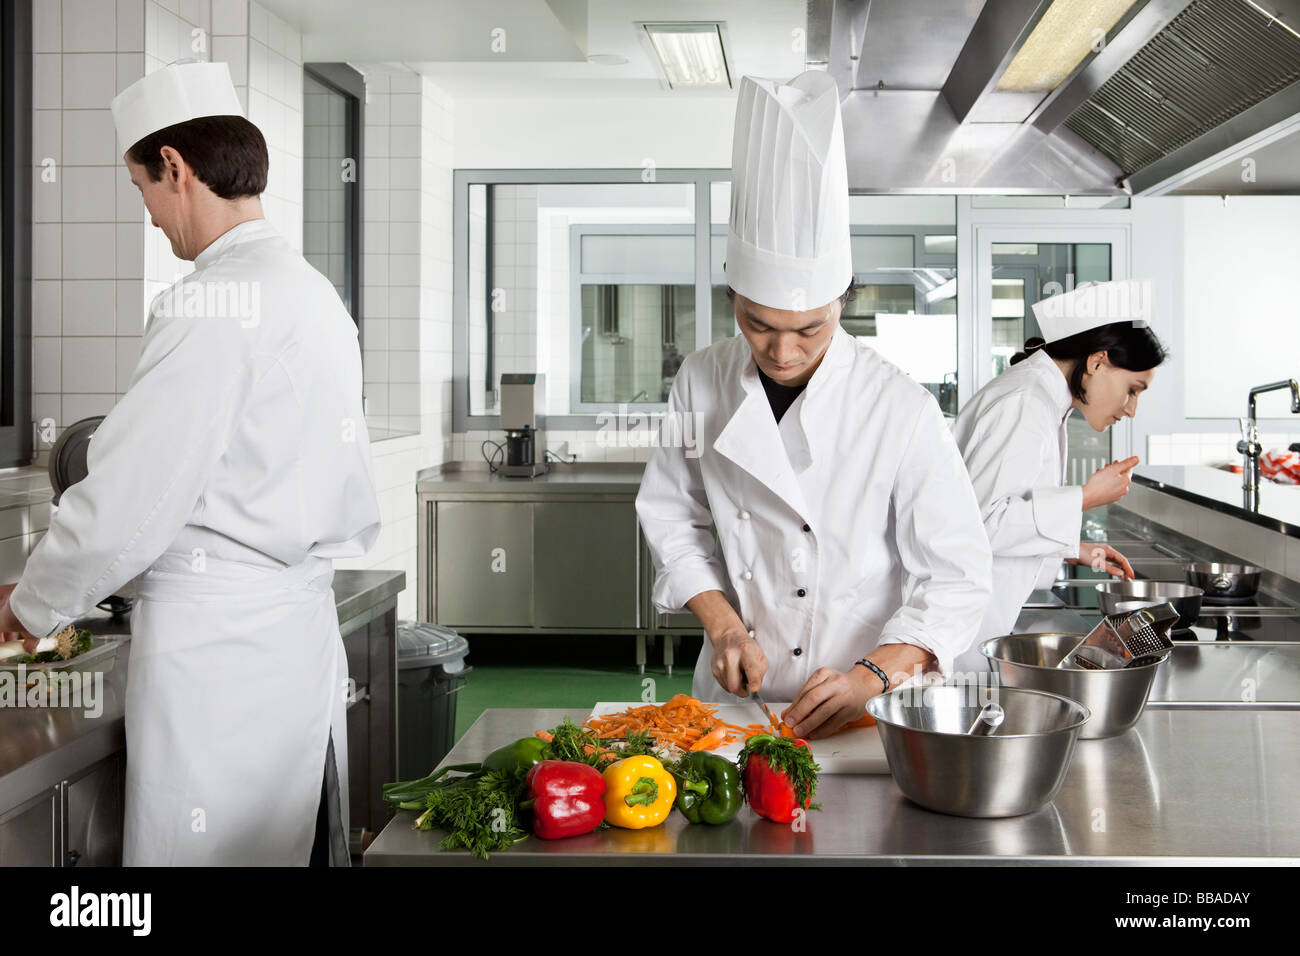 Three chefs working in a commercial kitchen Stock Photo